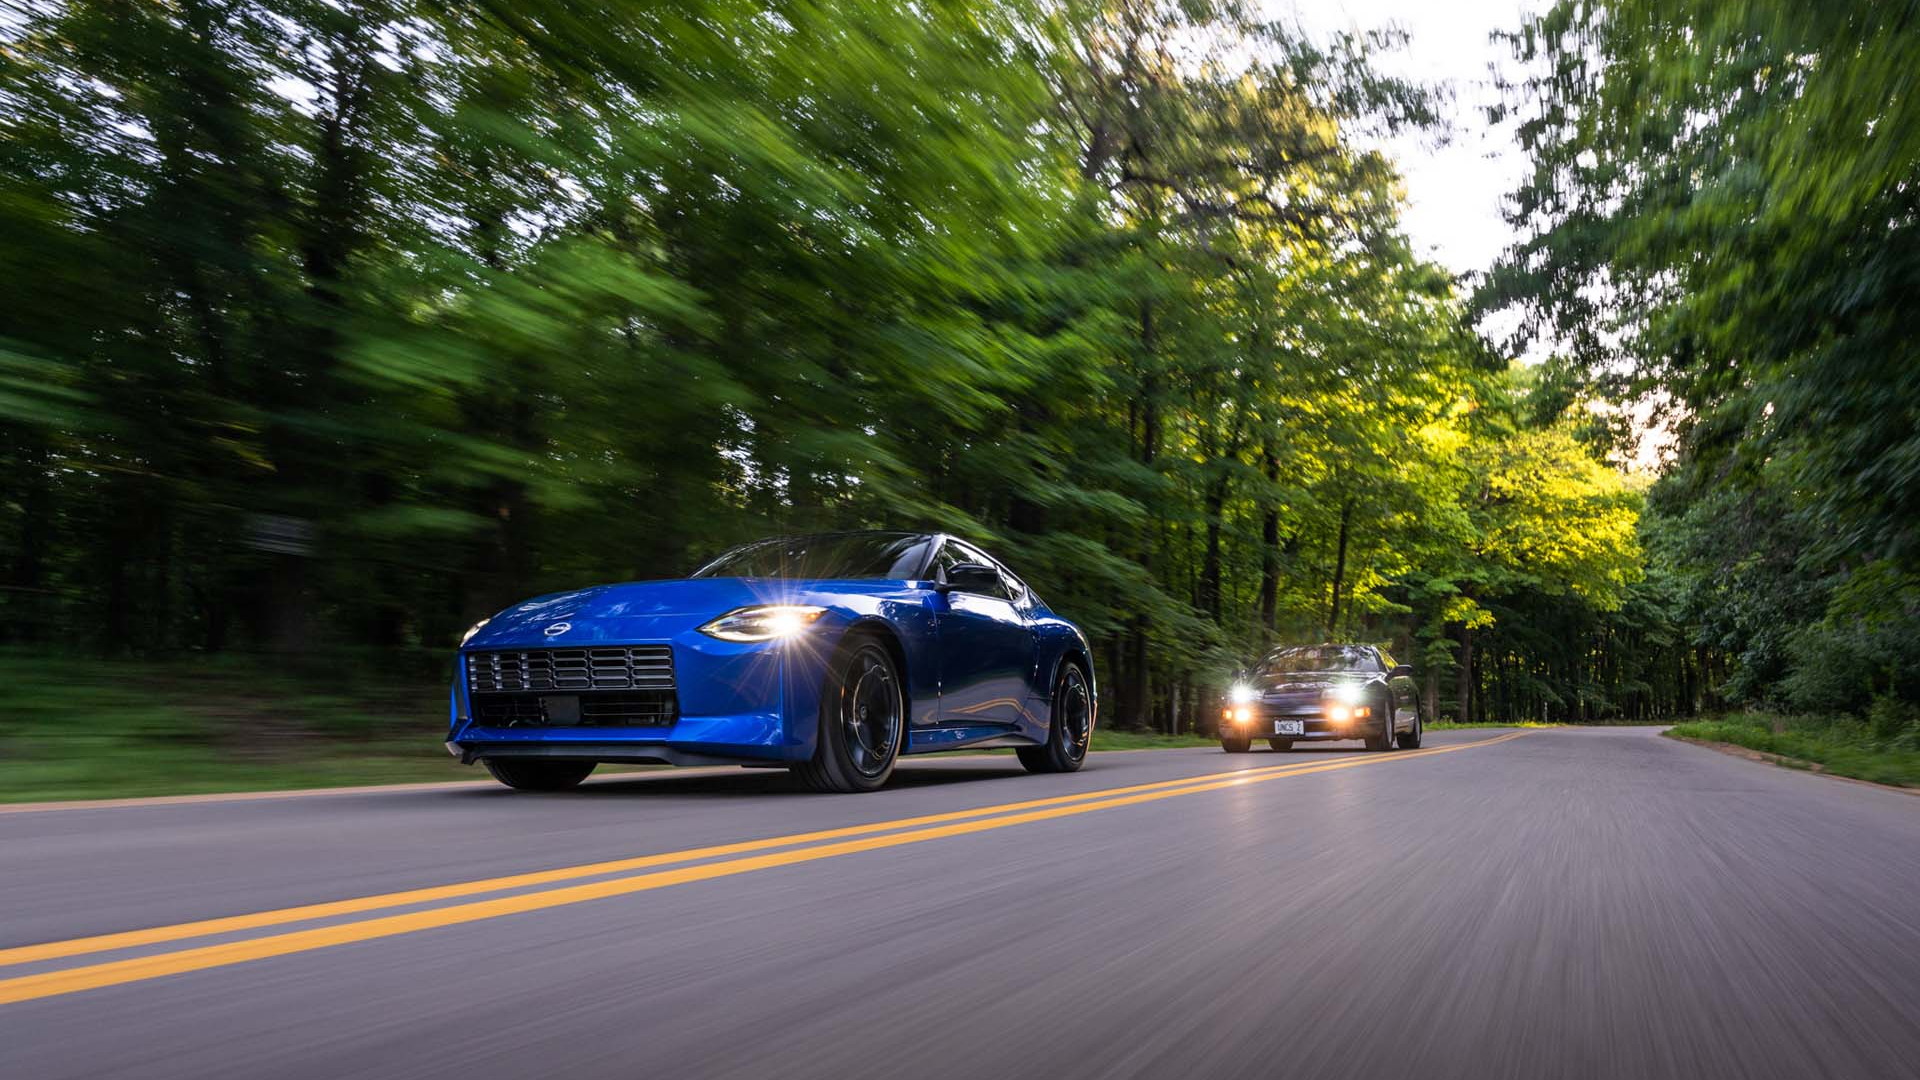 Review: The 2023 Nissan Z digs into the past to exceed expectations